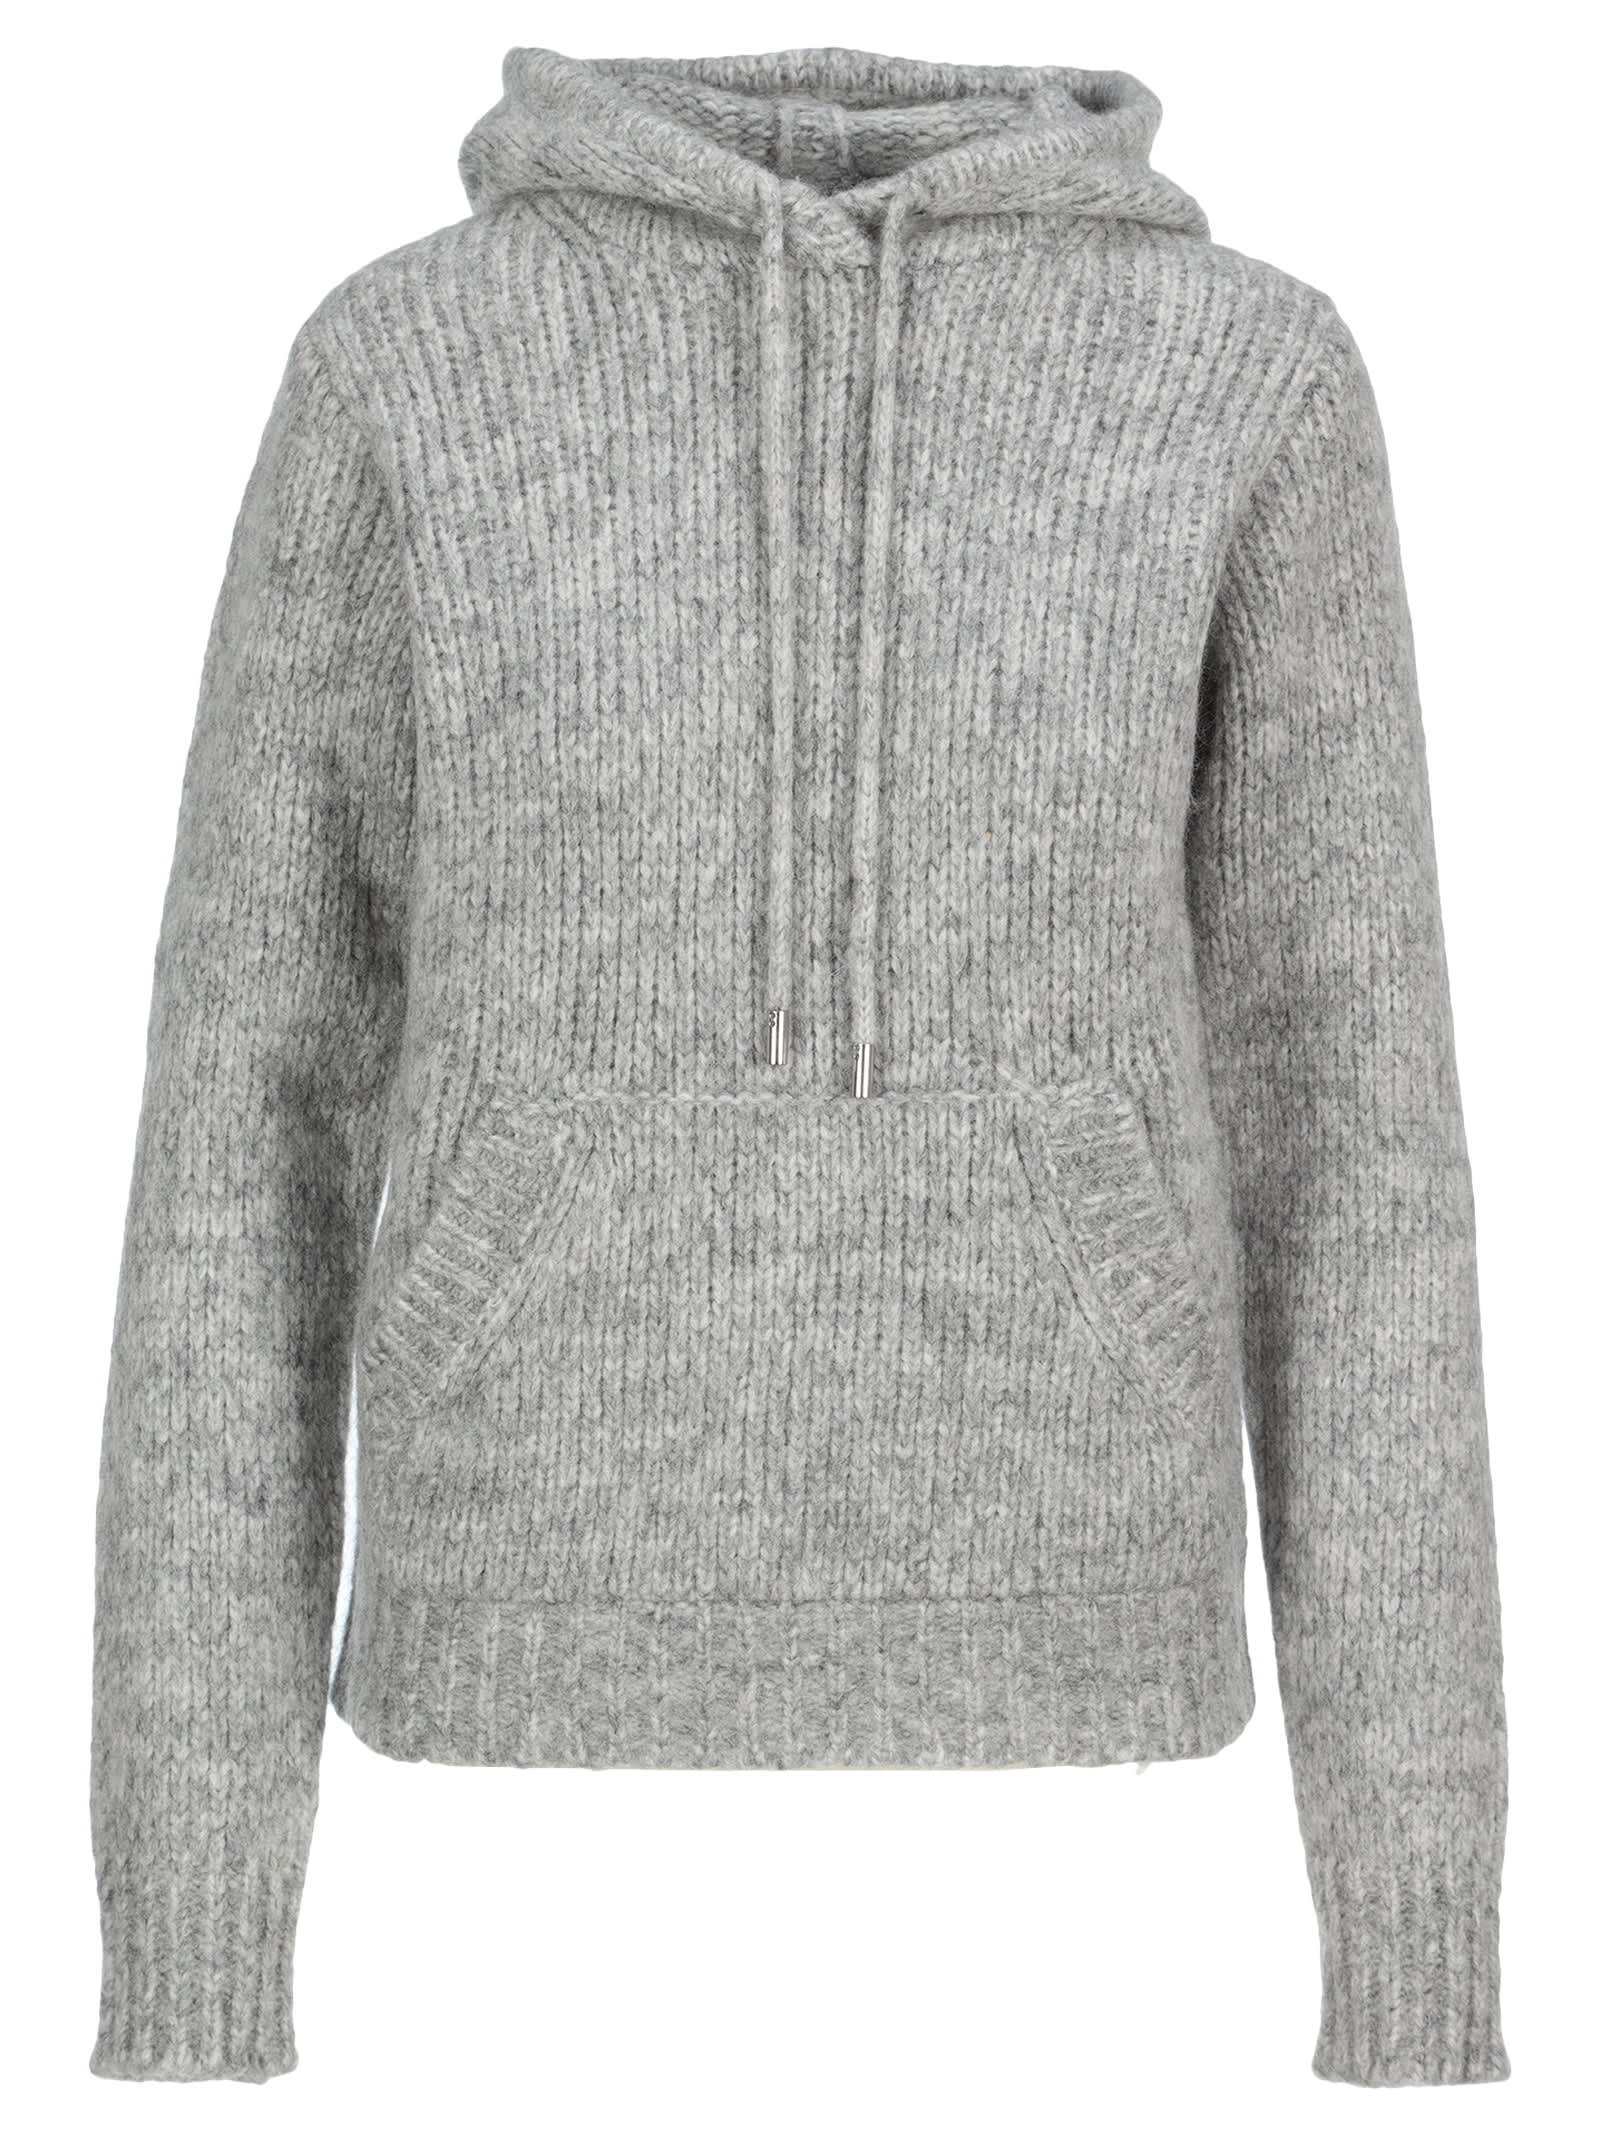 Helmut Lang Knit Hooded In Grey | ModeSens